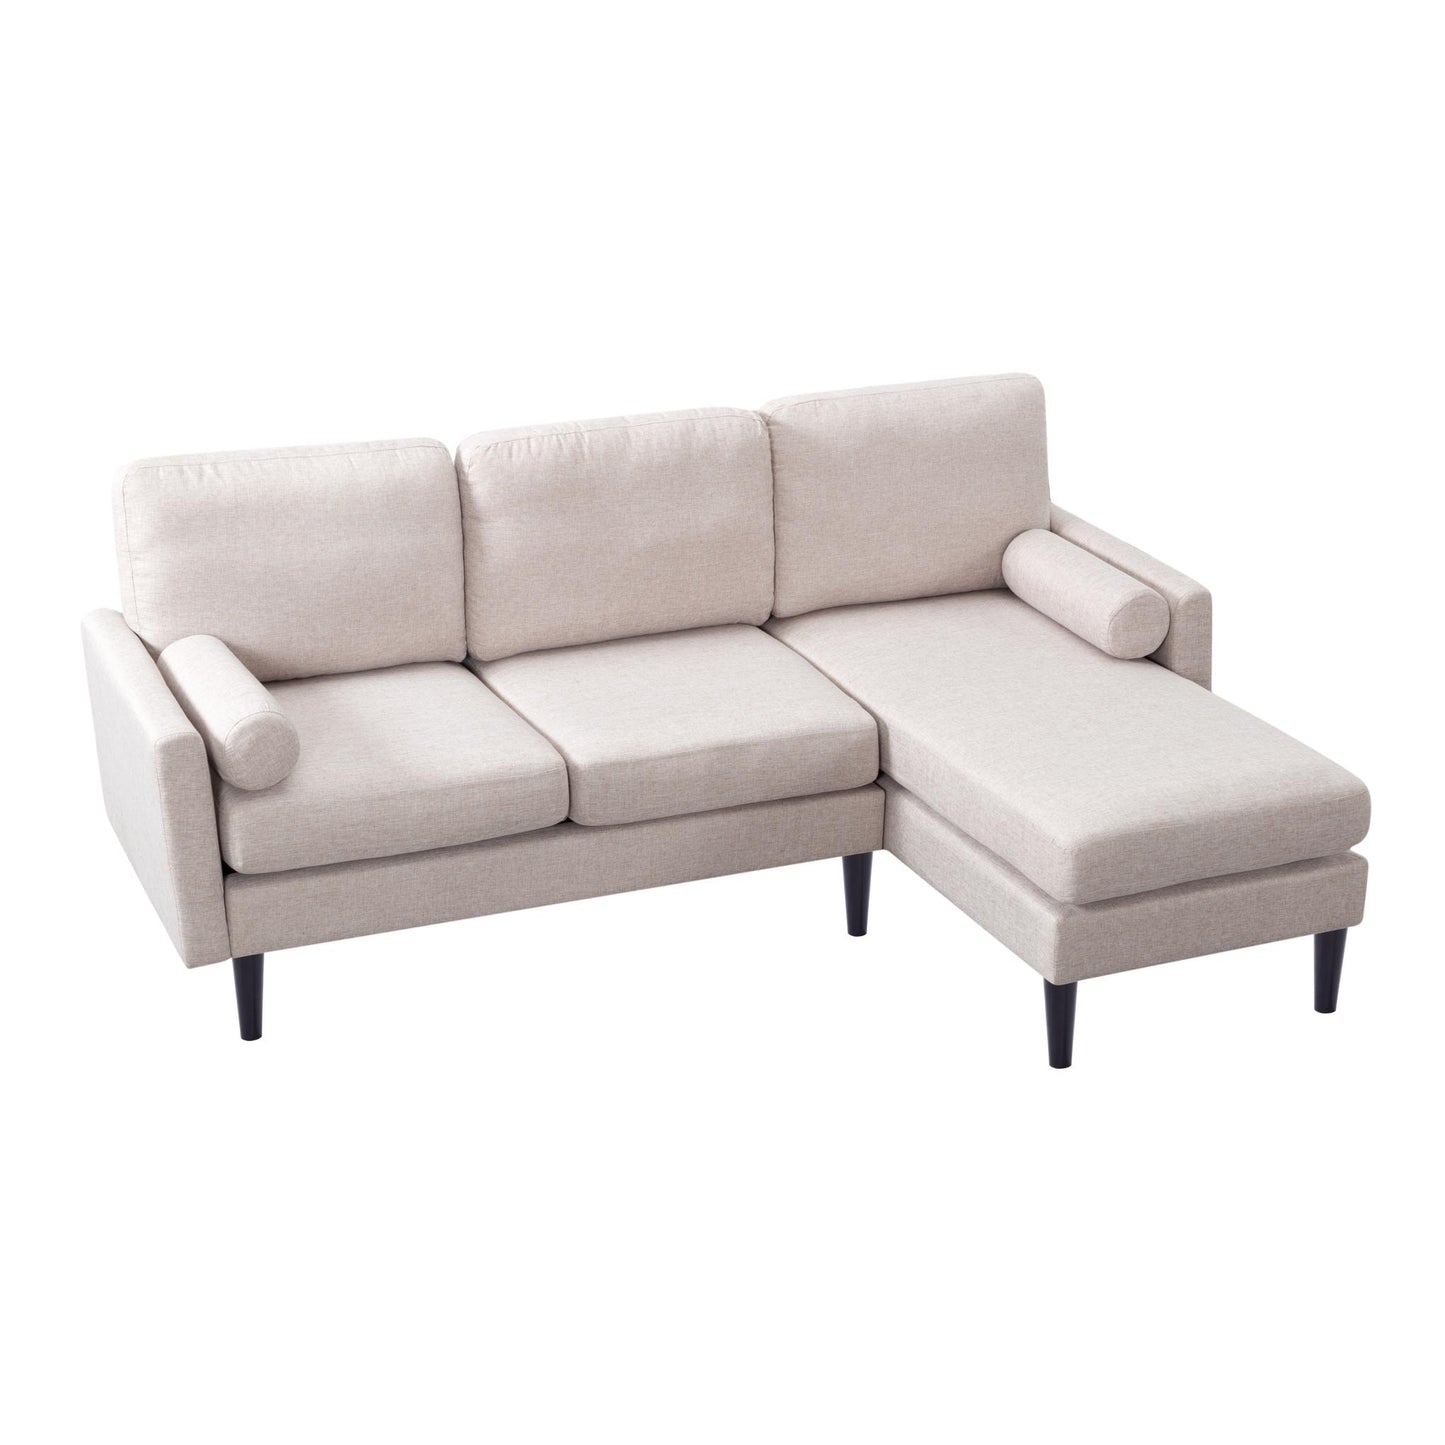 78.7” L-Shaped Reversible Sectional Sofa & Chaise